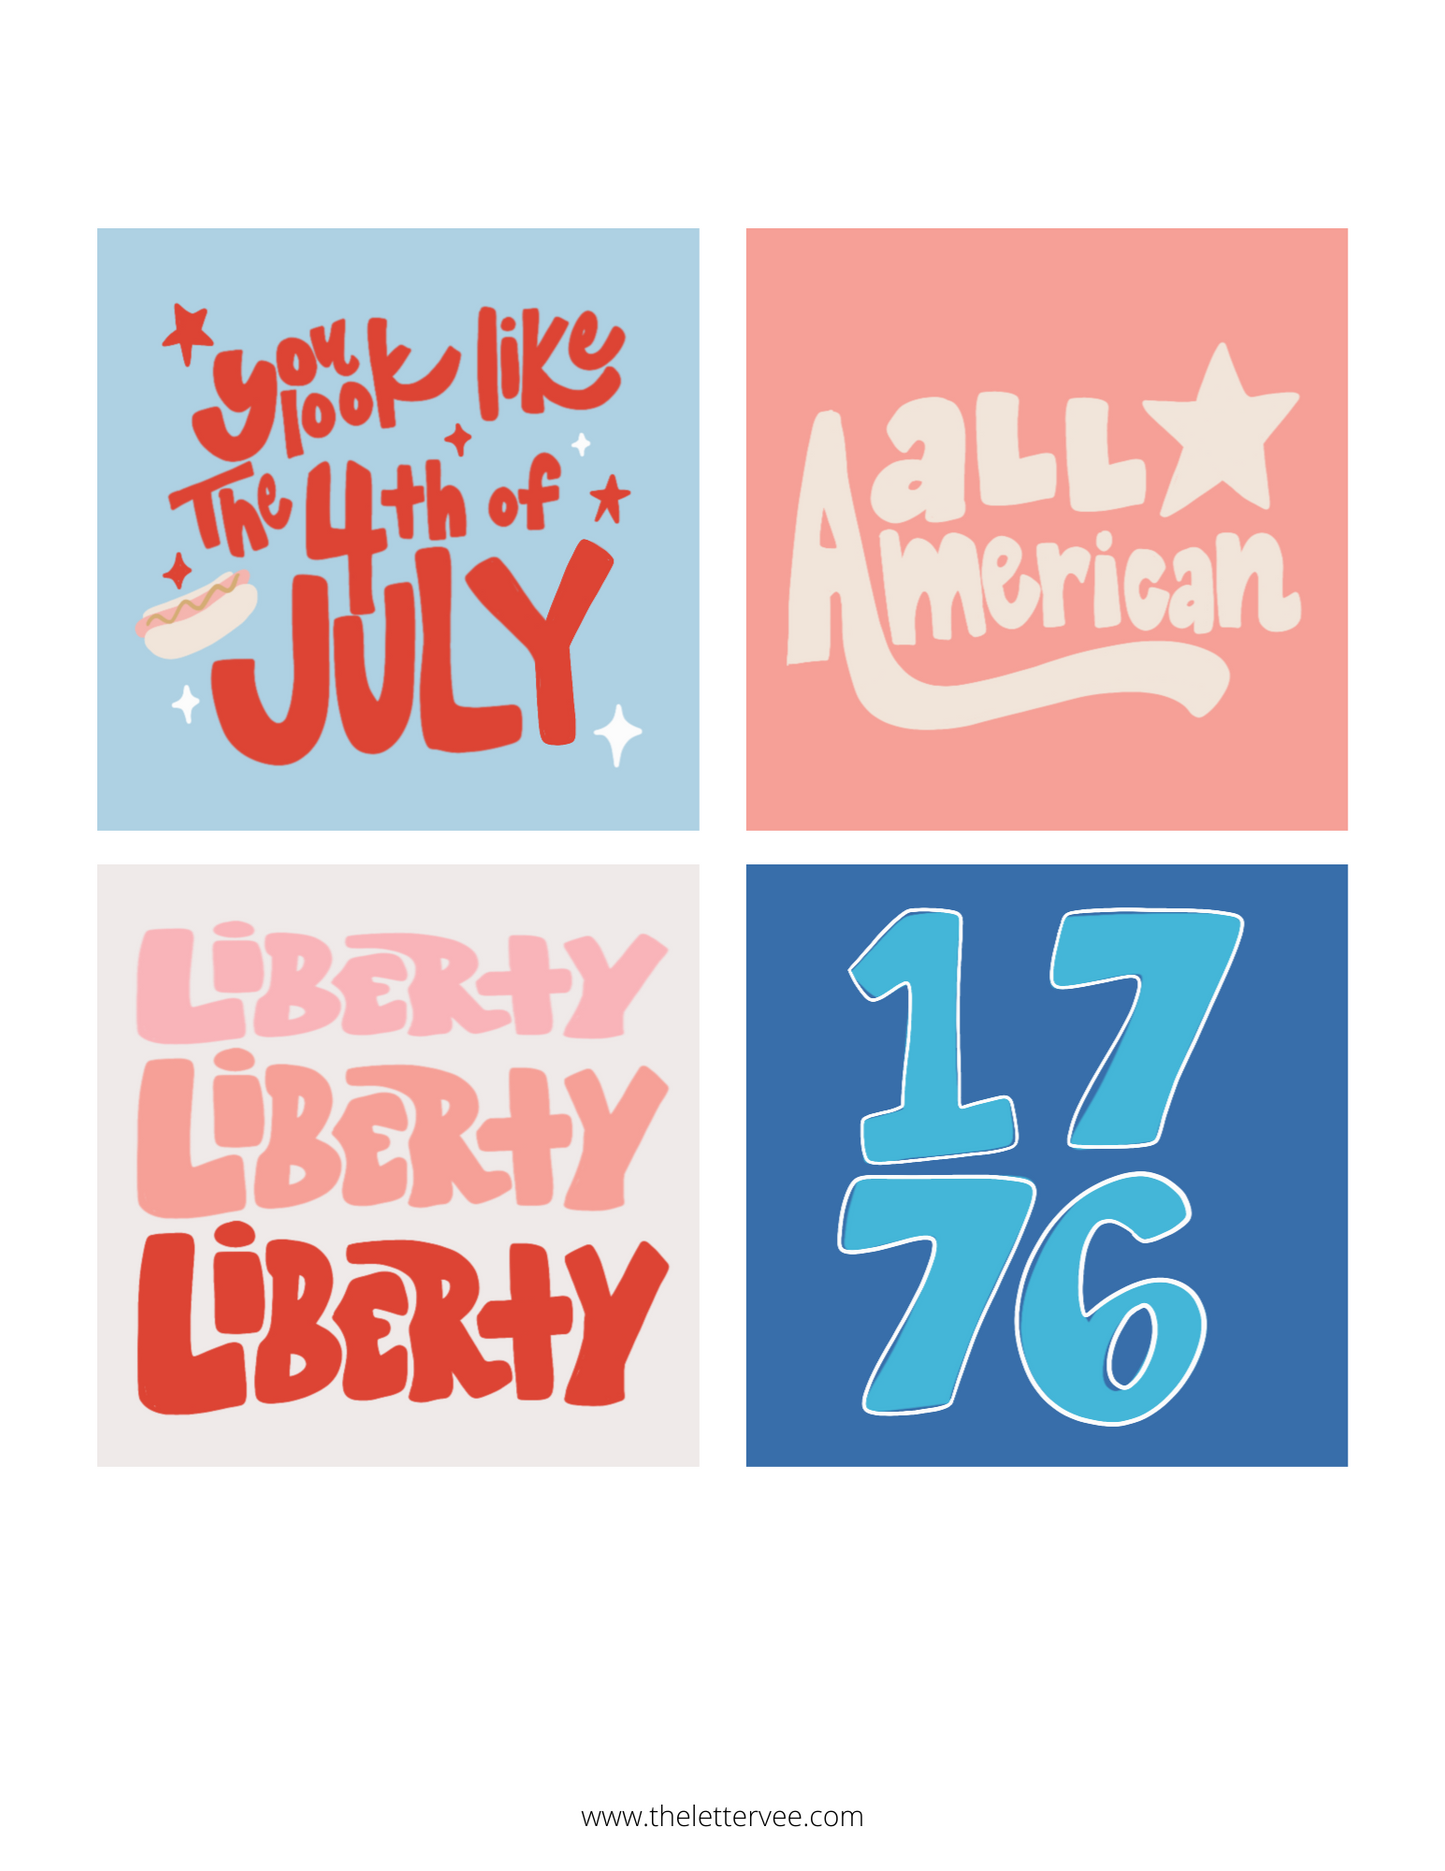 Party like it's 1776 | Printable tags